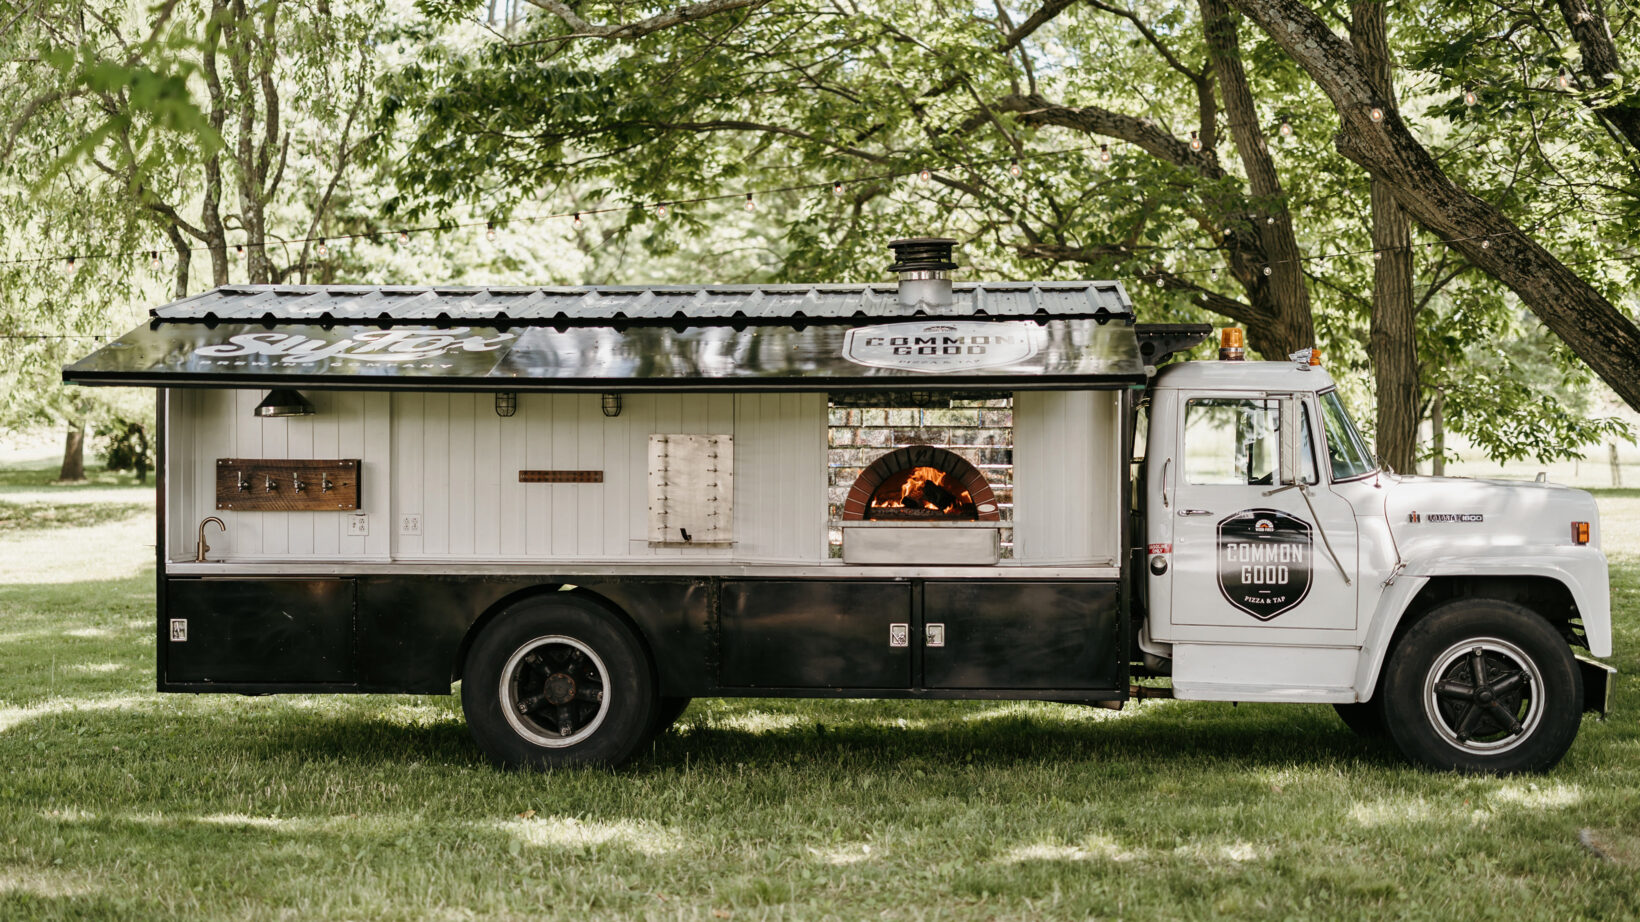 Wood fired pizza catering truck on lawn